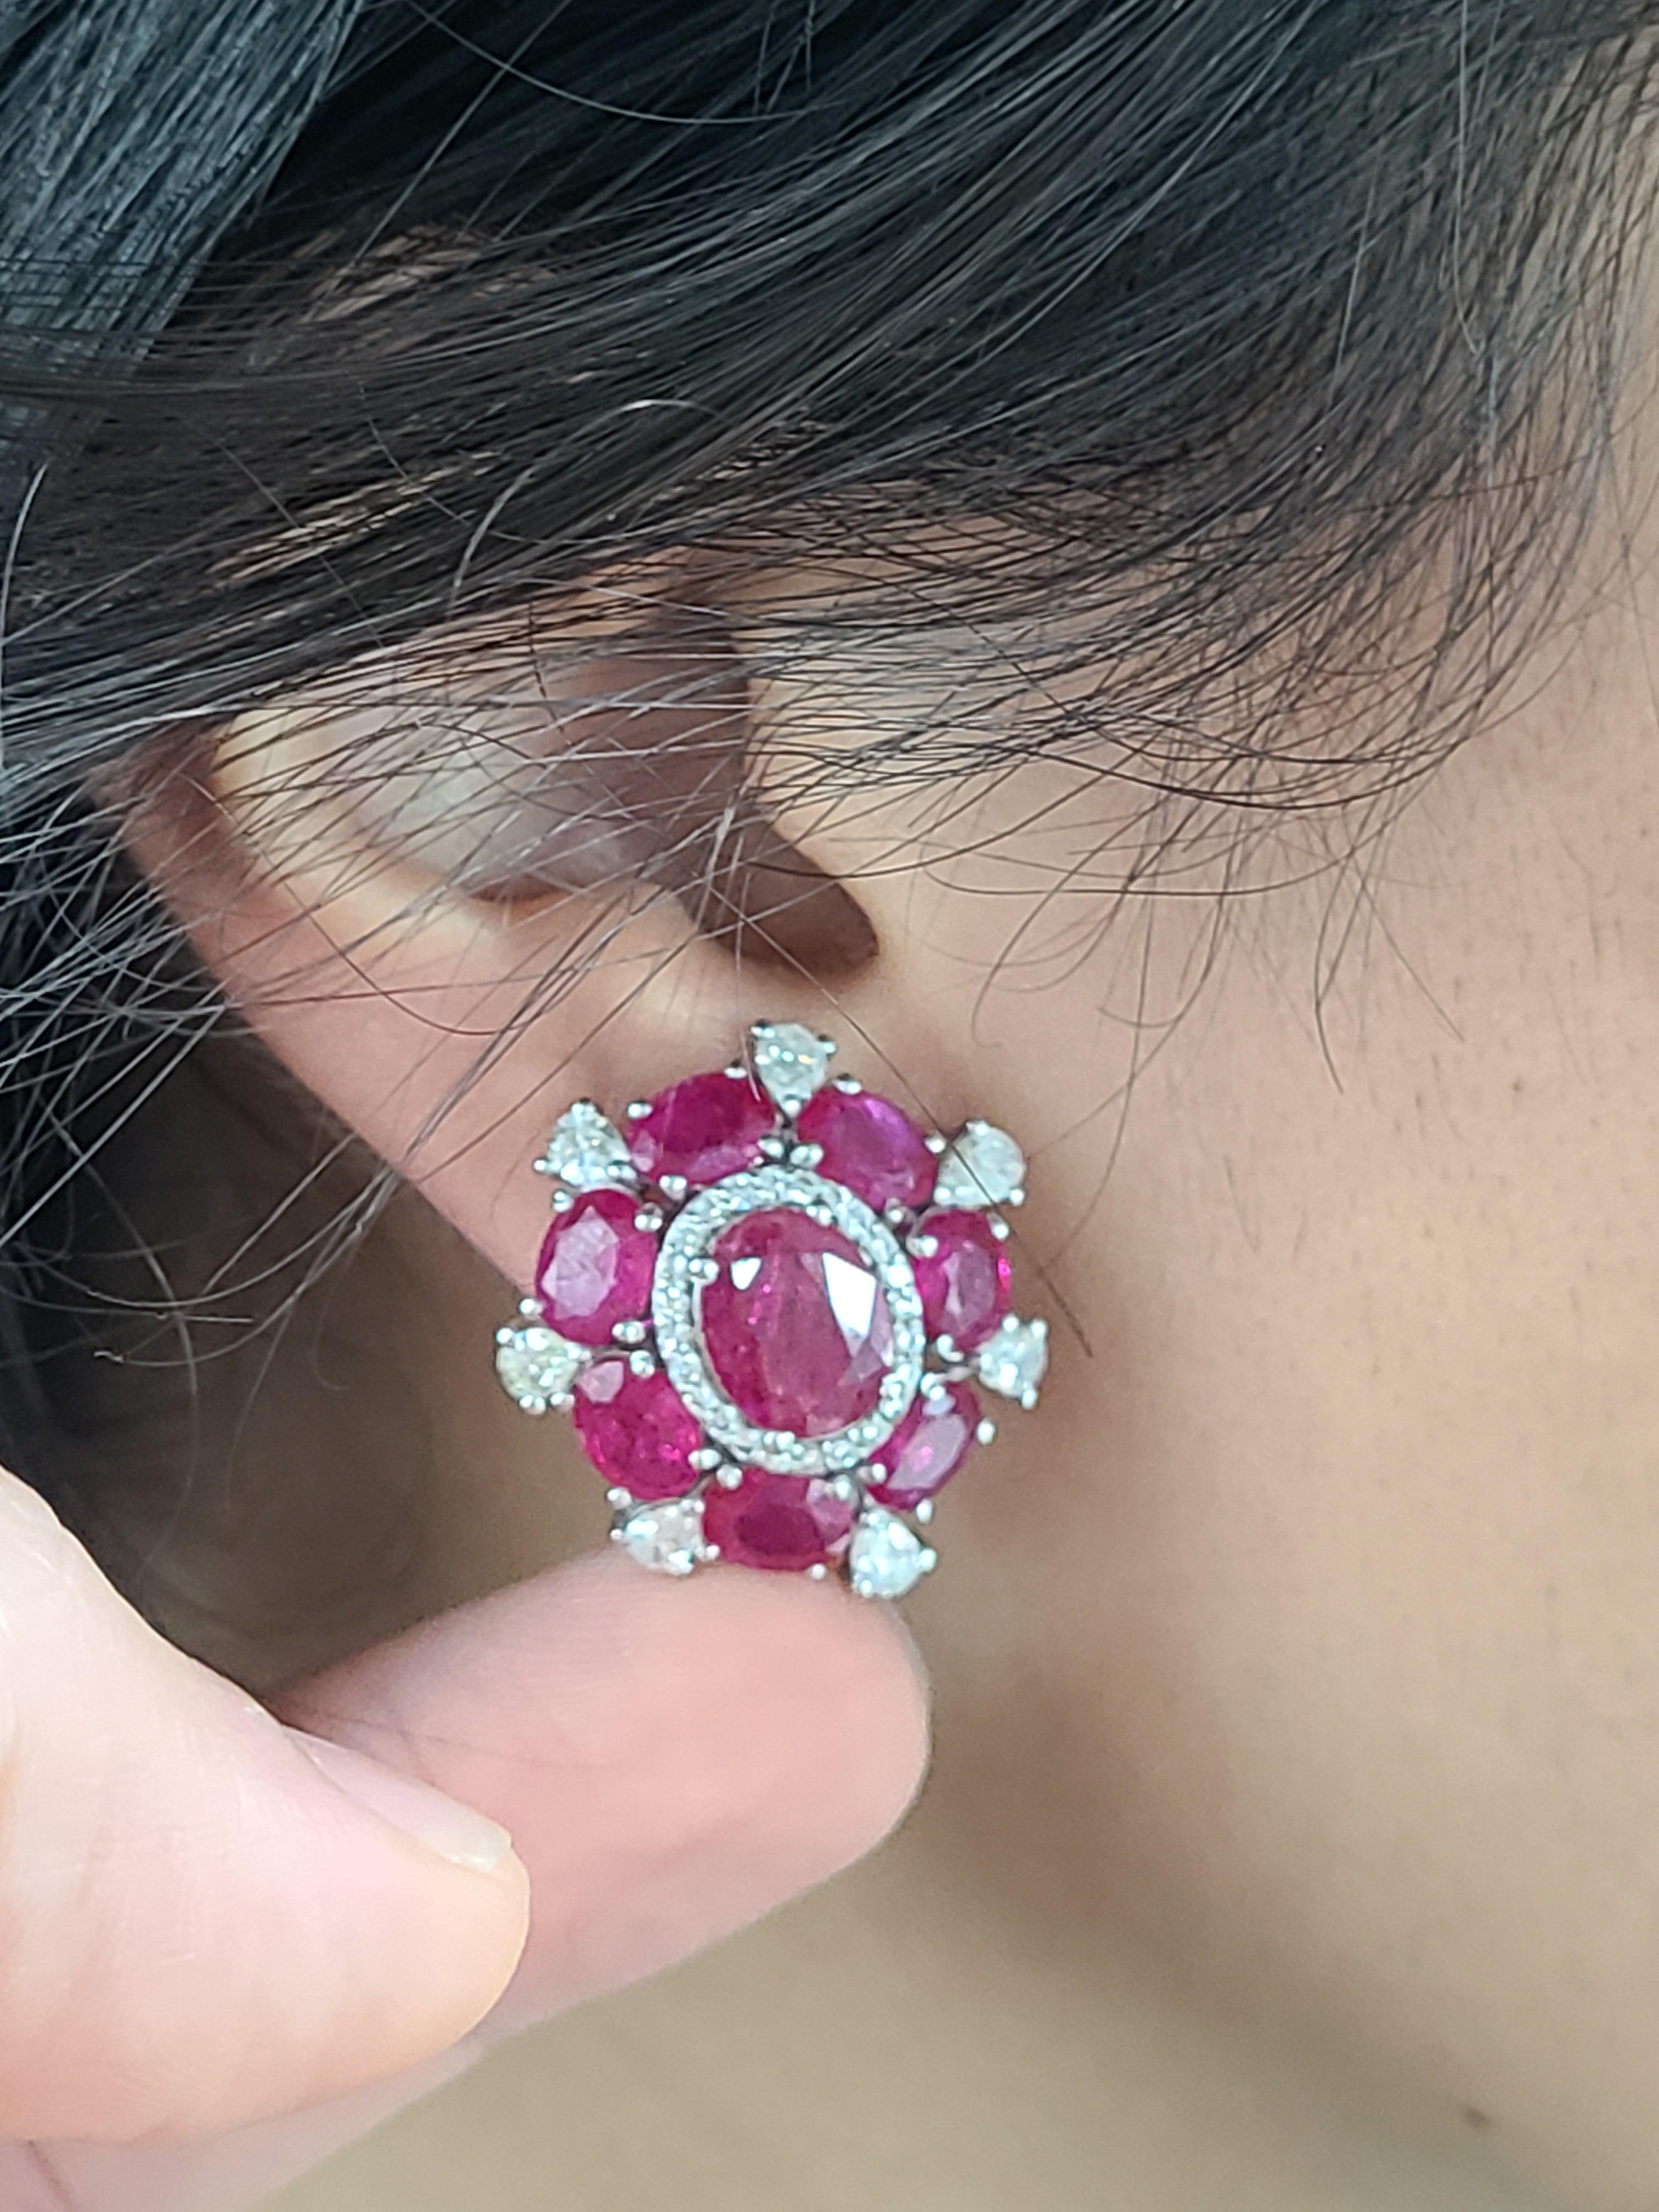 A very gorgeous pair of Ruby and Diamond Studs set in 18K White gold. The Rubies are of Mozambique origin and completely natural, without any treatment. The weight of the Rubies is 13.21 carats. The weight of the Diamonds is 1.95 carats. The